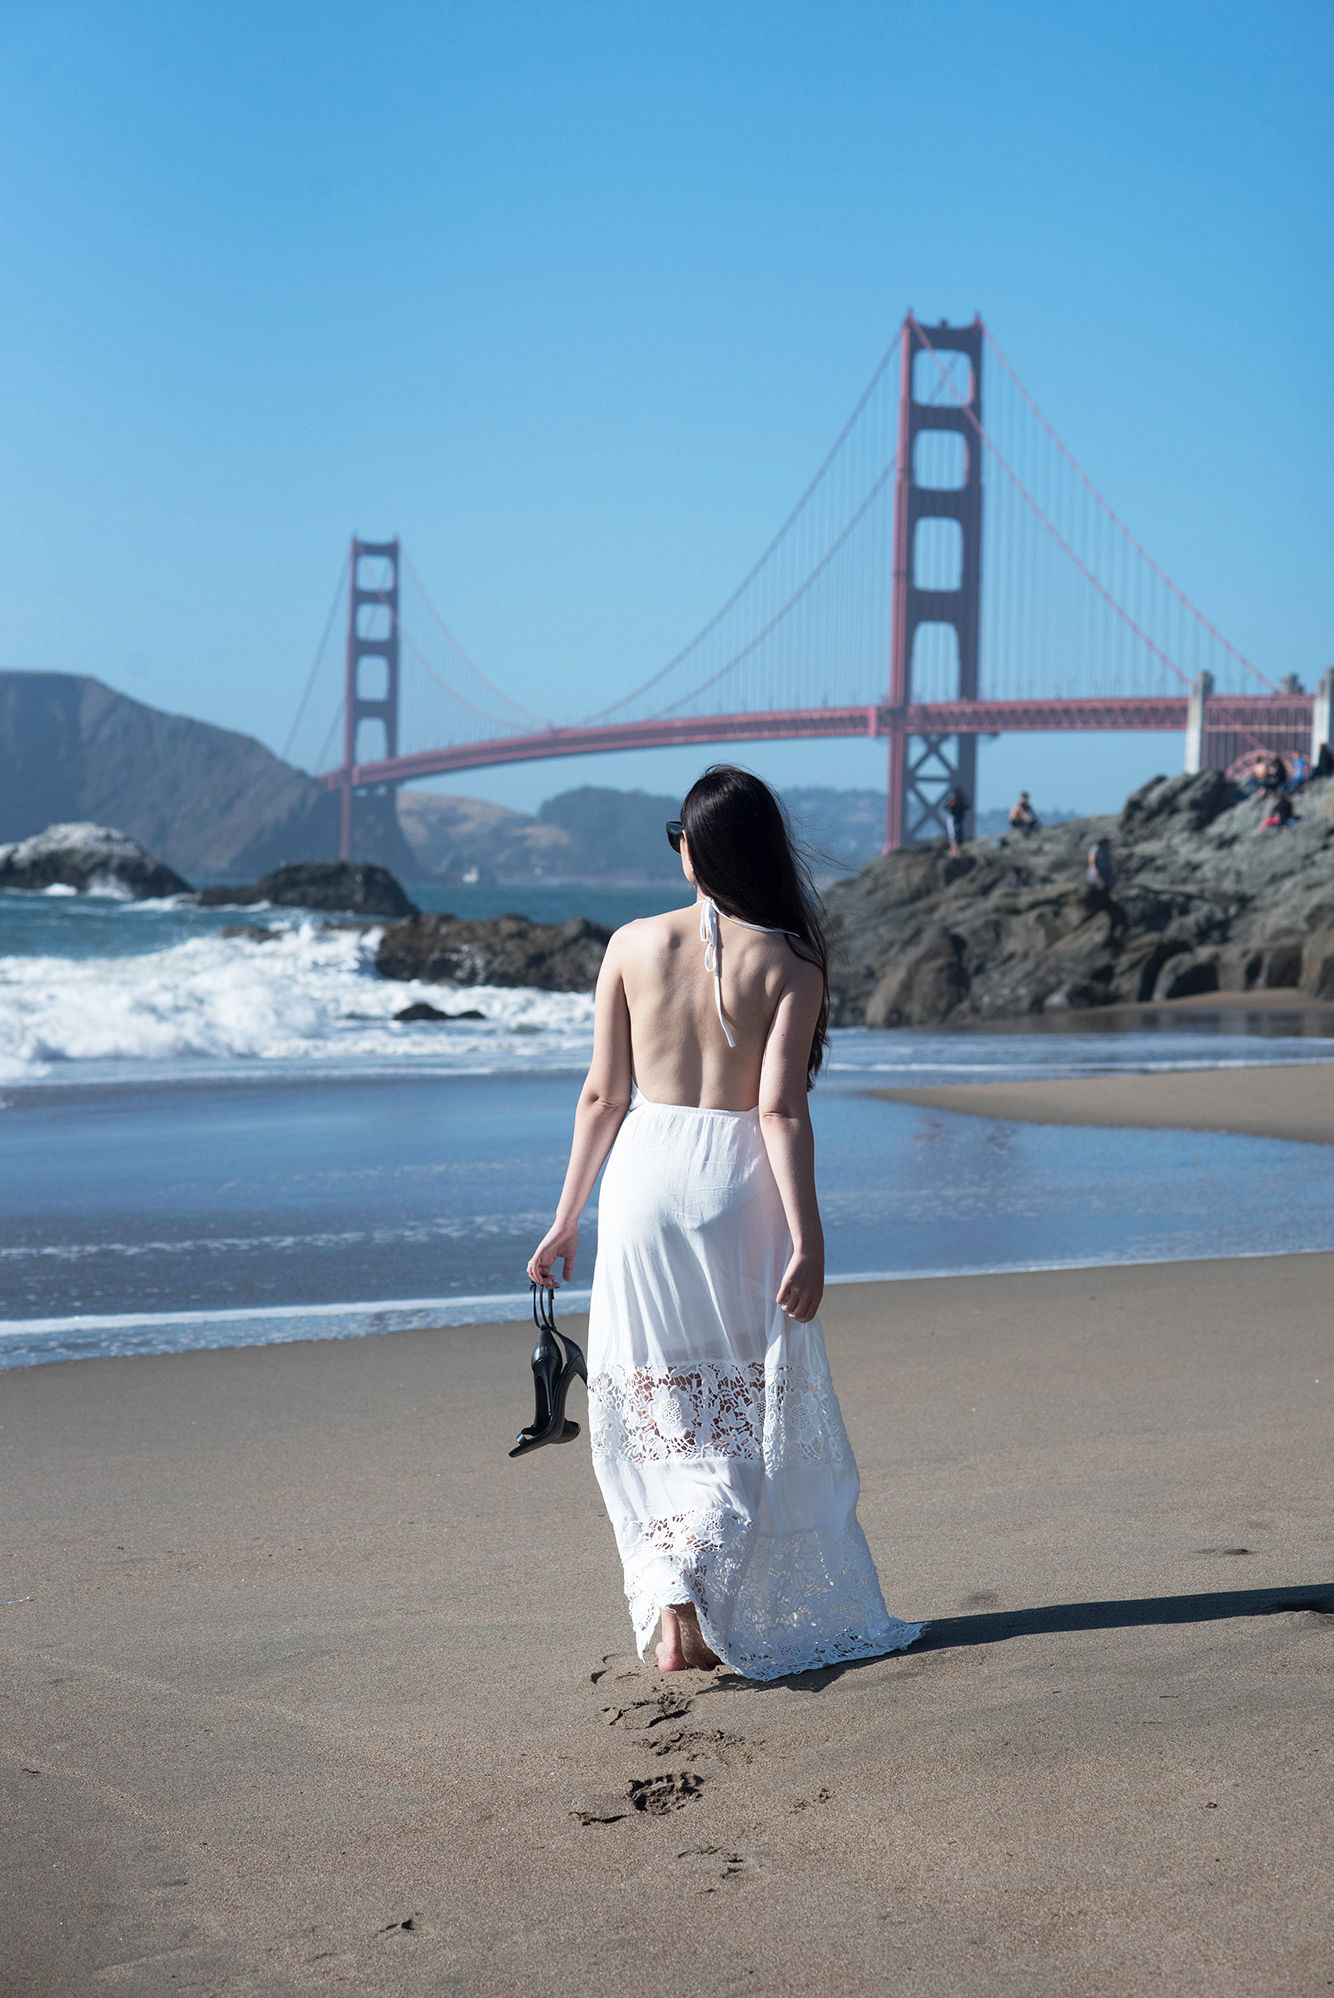 coco-and-vera-top-vancouver-style-blog-top-canadian-style-blog-top-blogger-lulus-maxi-dress-steve-madden-stecy-sandals-marshall-beach-san-francisco-celine-sunglasses copy